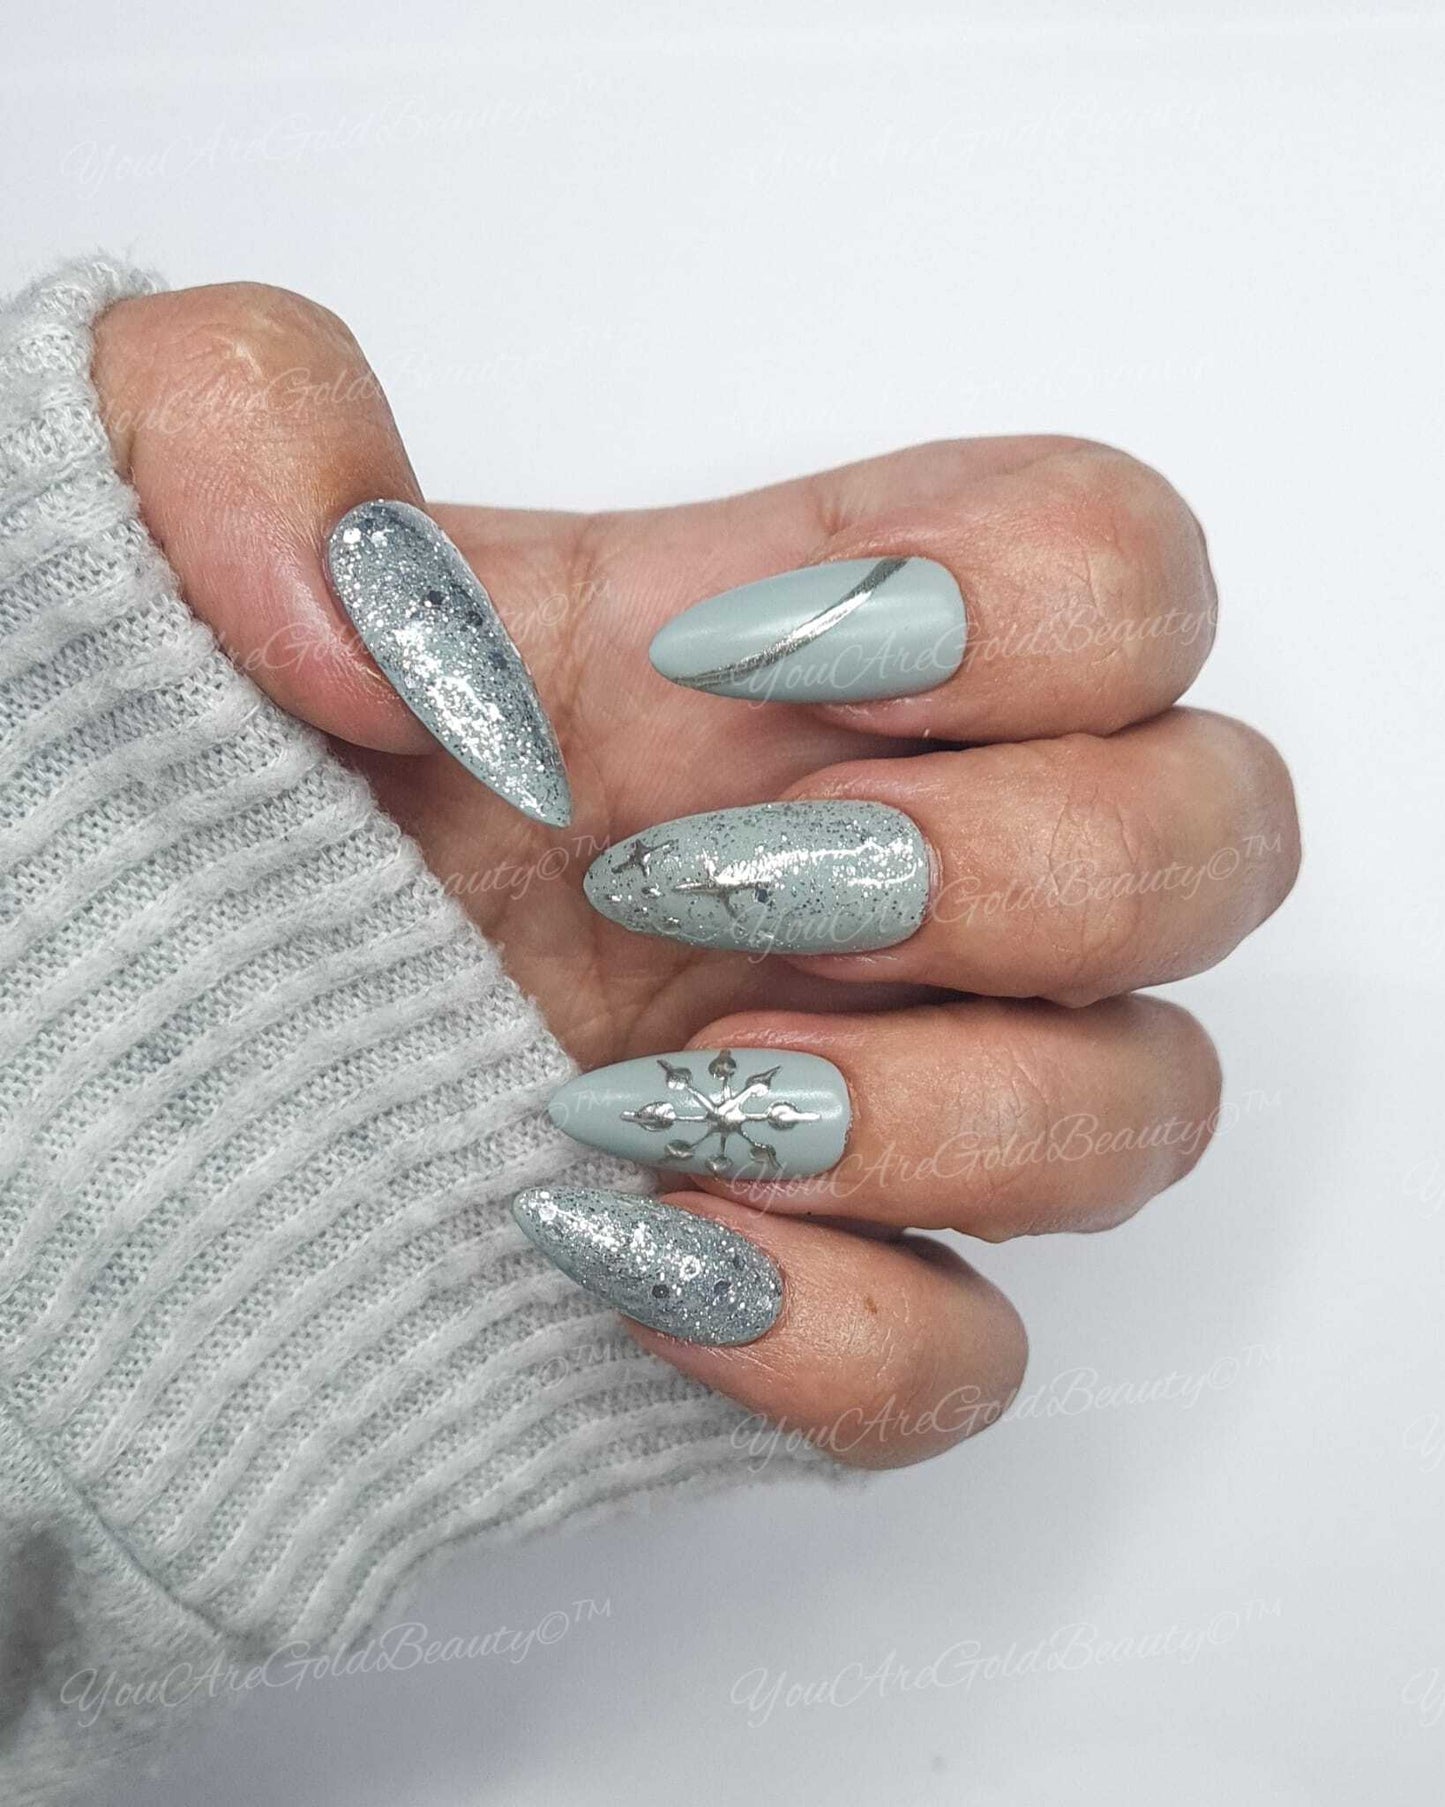 Grey Winter Almond Shape Nails with Silver Chrome Snowflake and Silver Glitter accent nails.